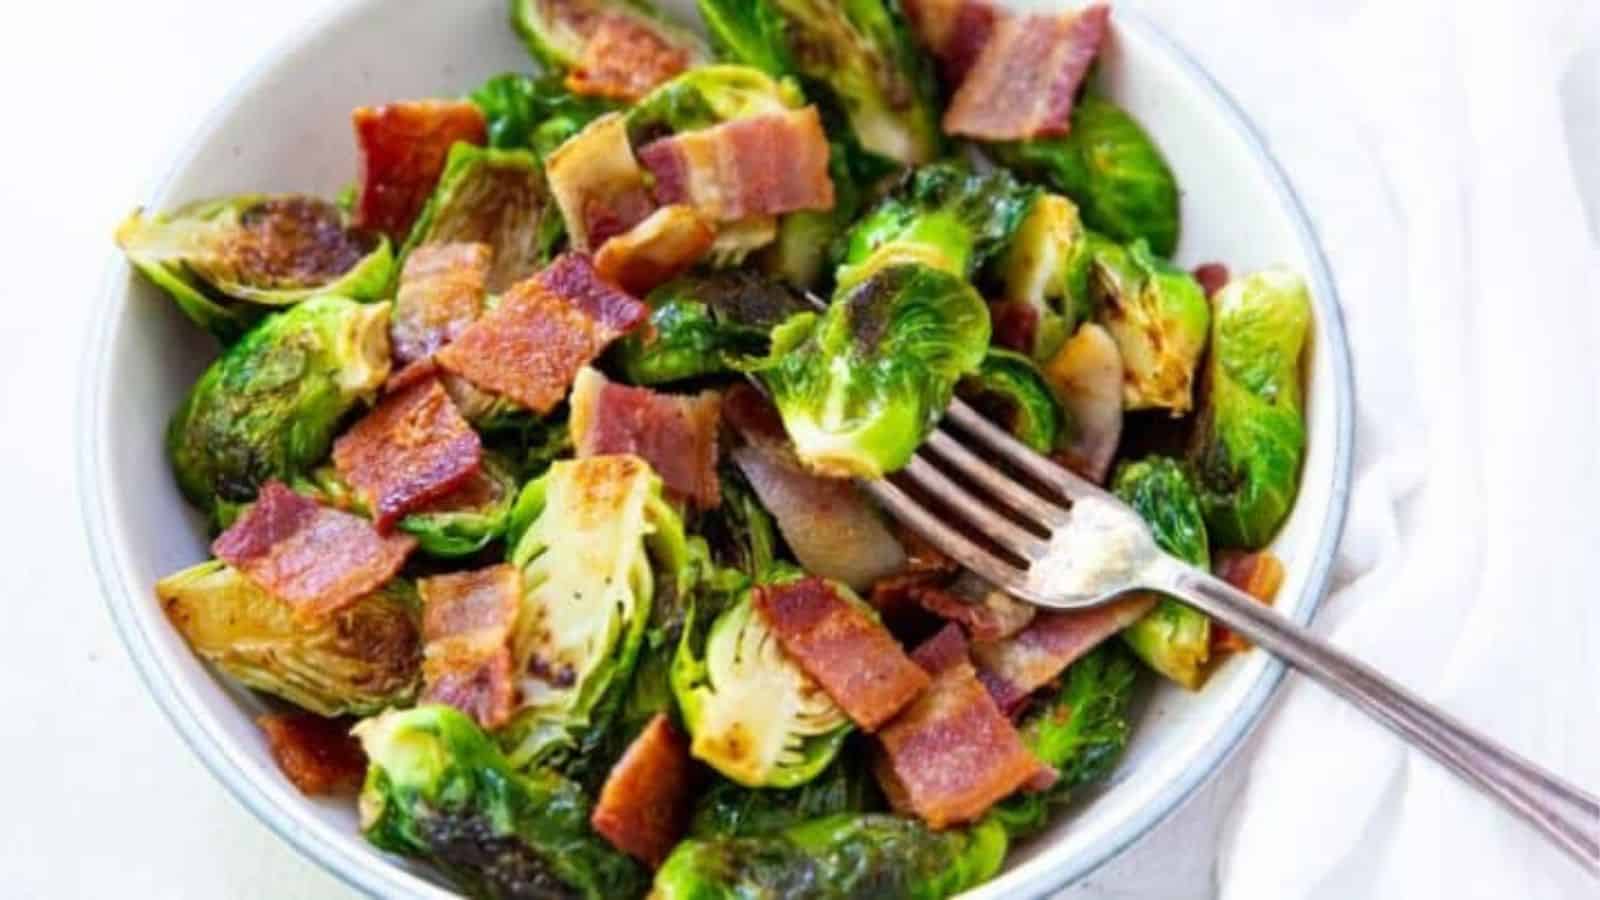 Blackstone Brussel Spouts with bacon in a white bowl with a fork.